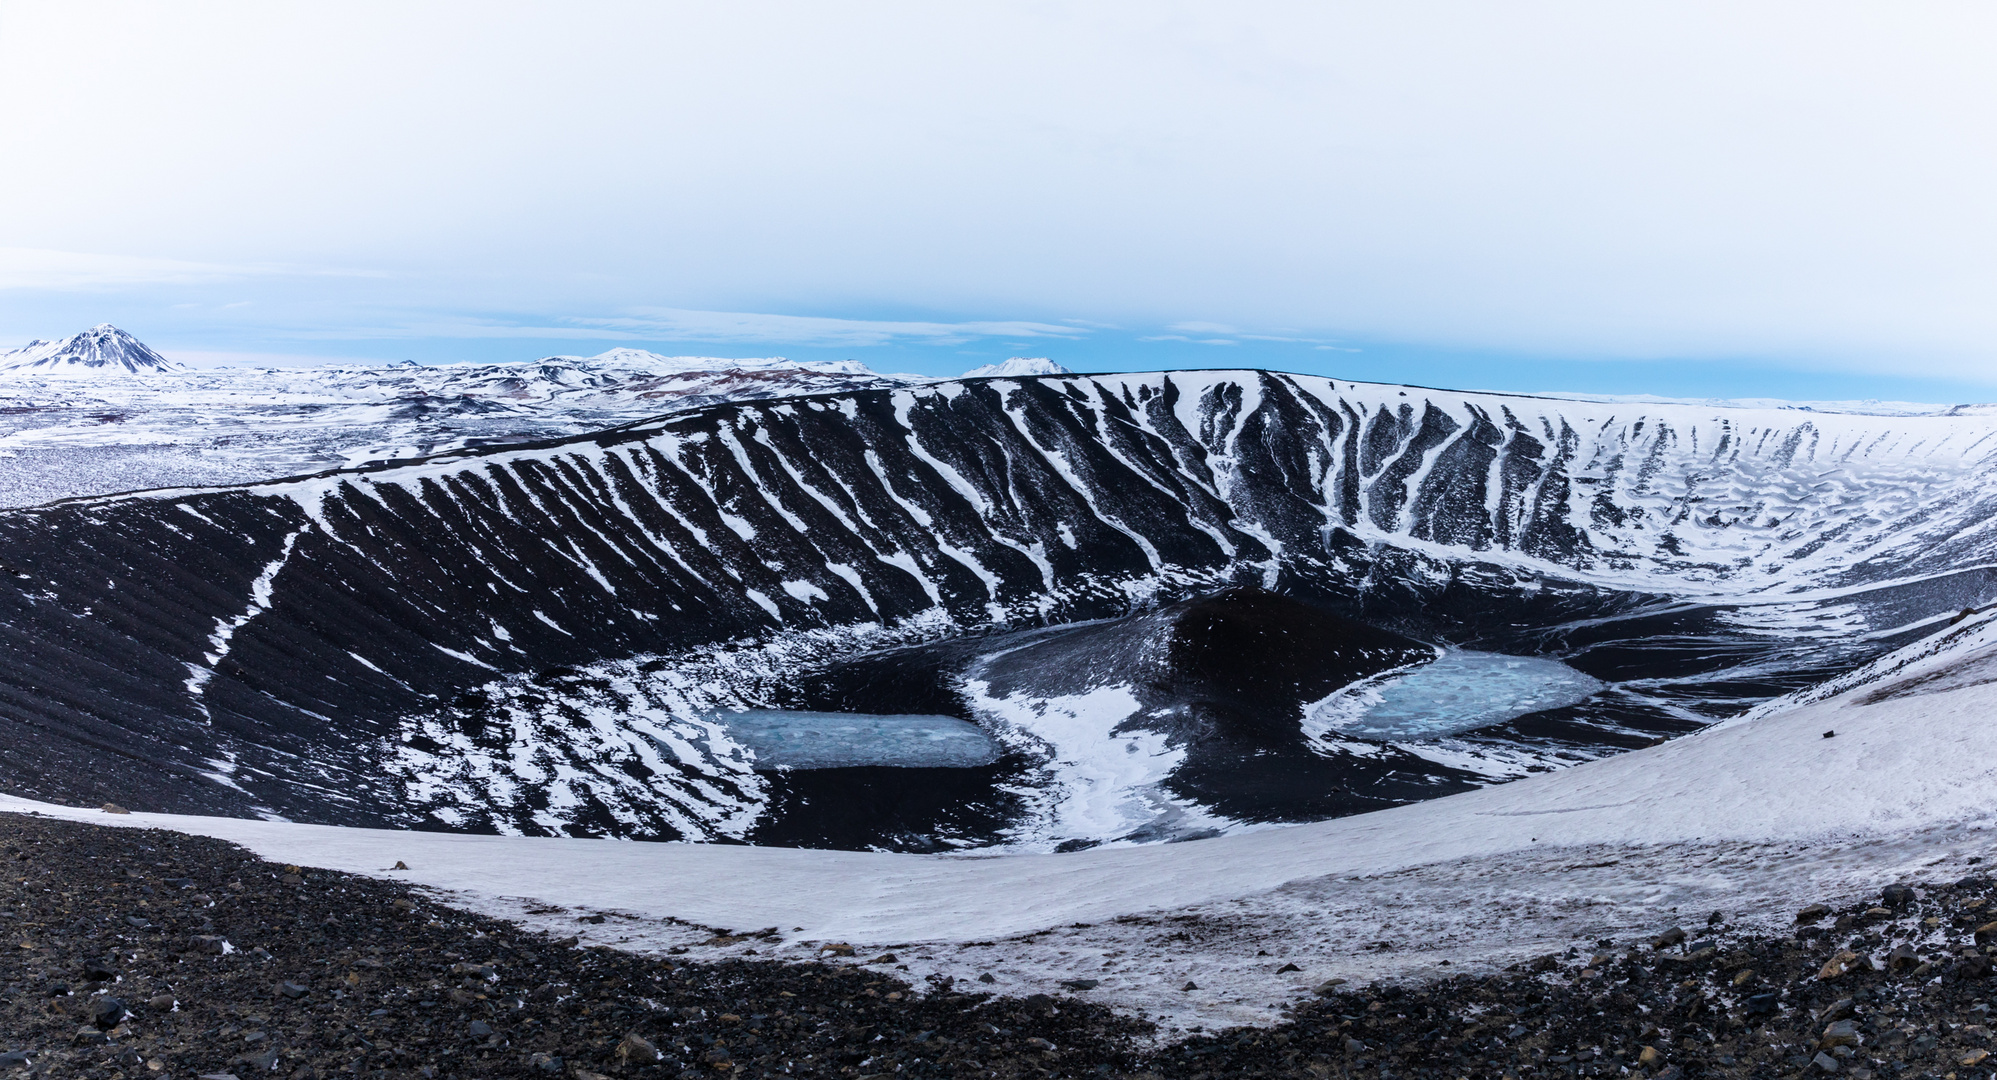 Crater Hverfjall